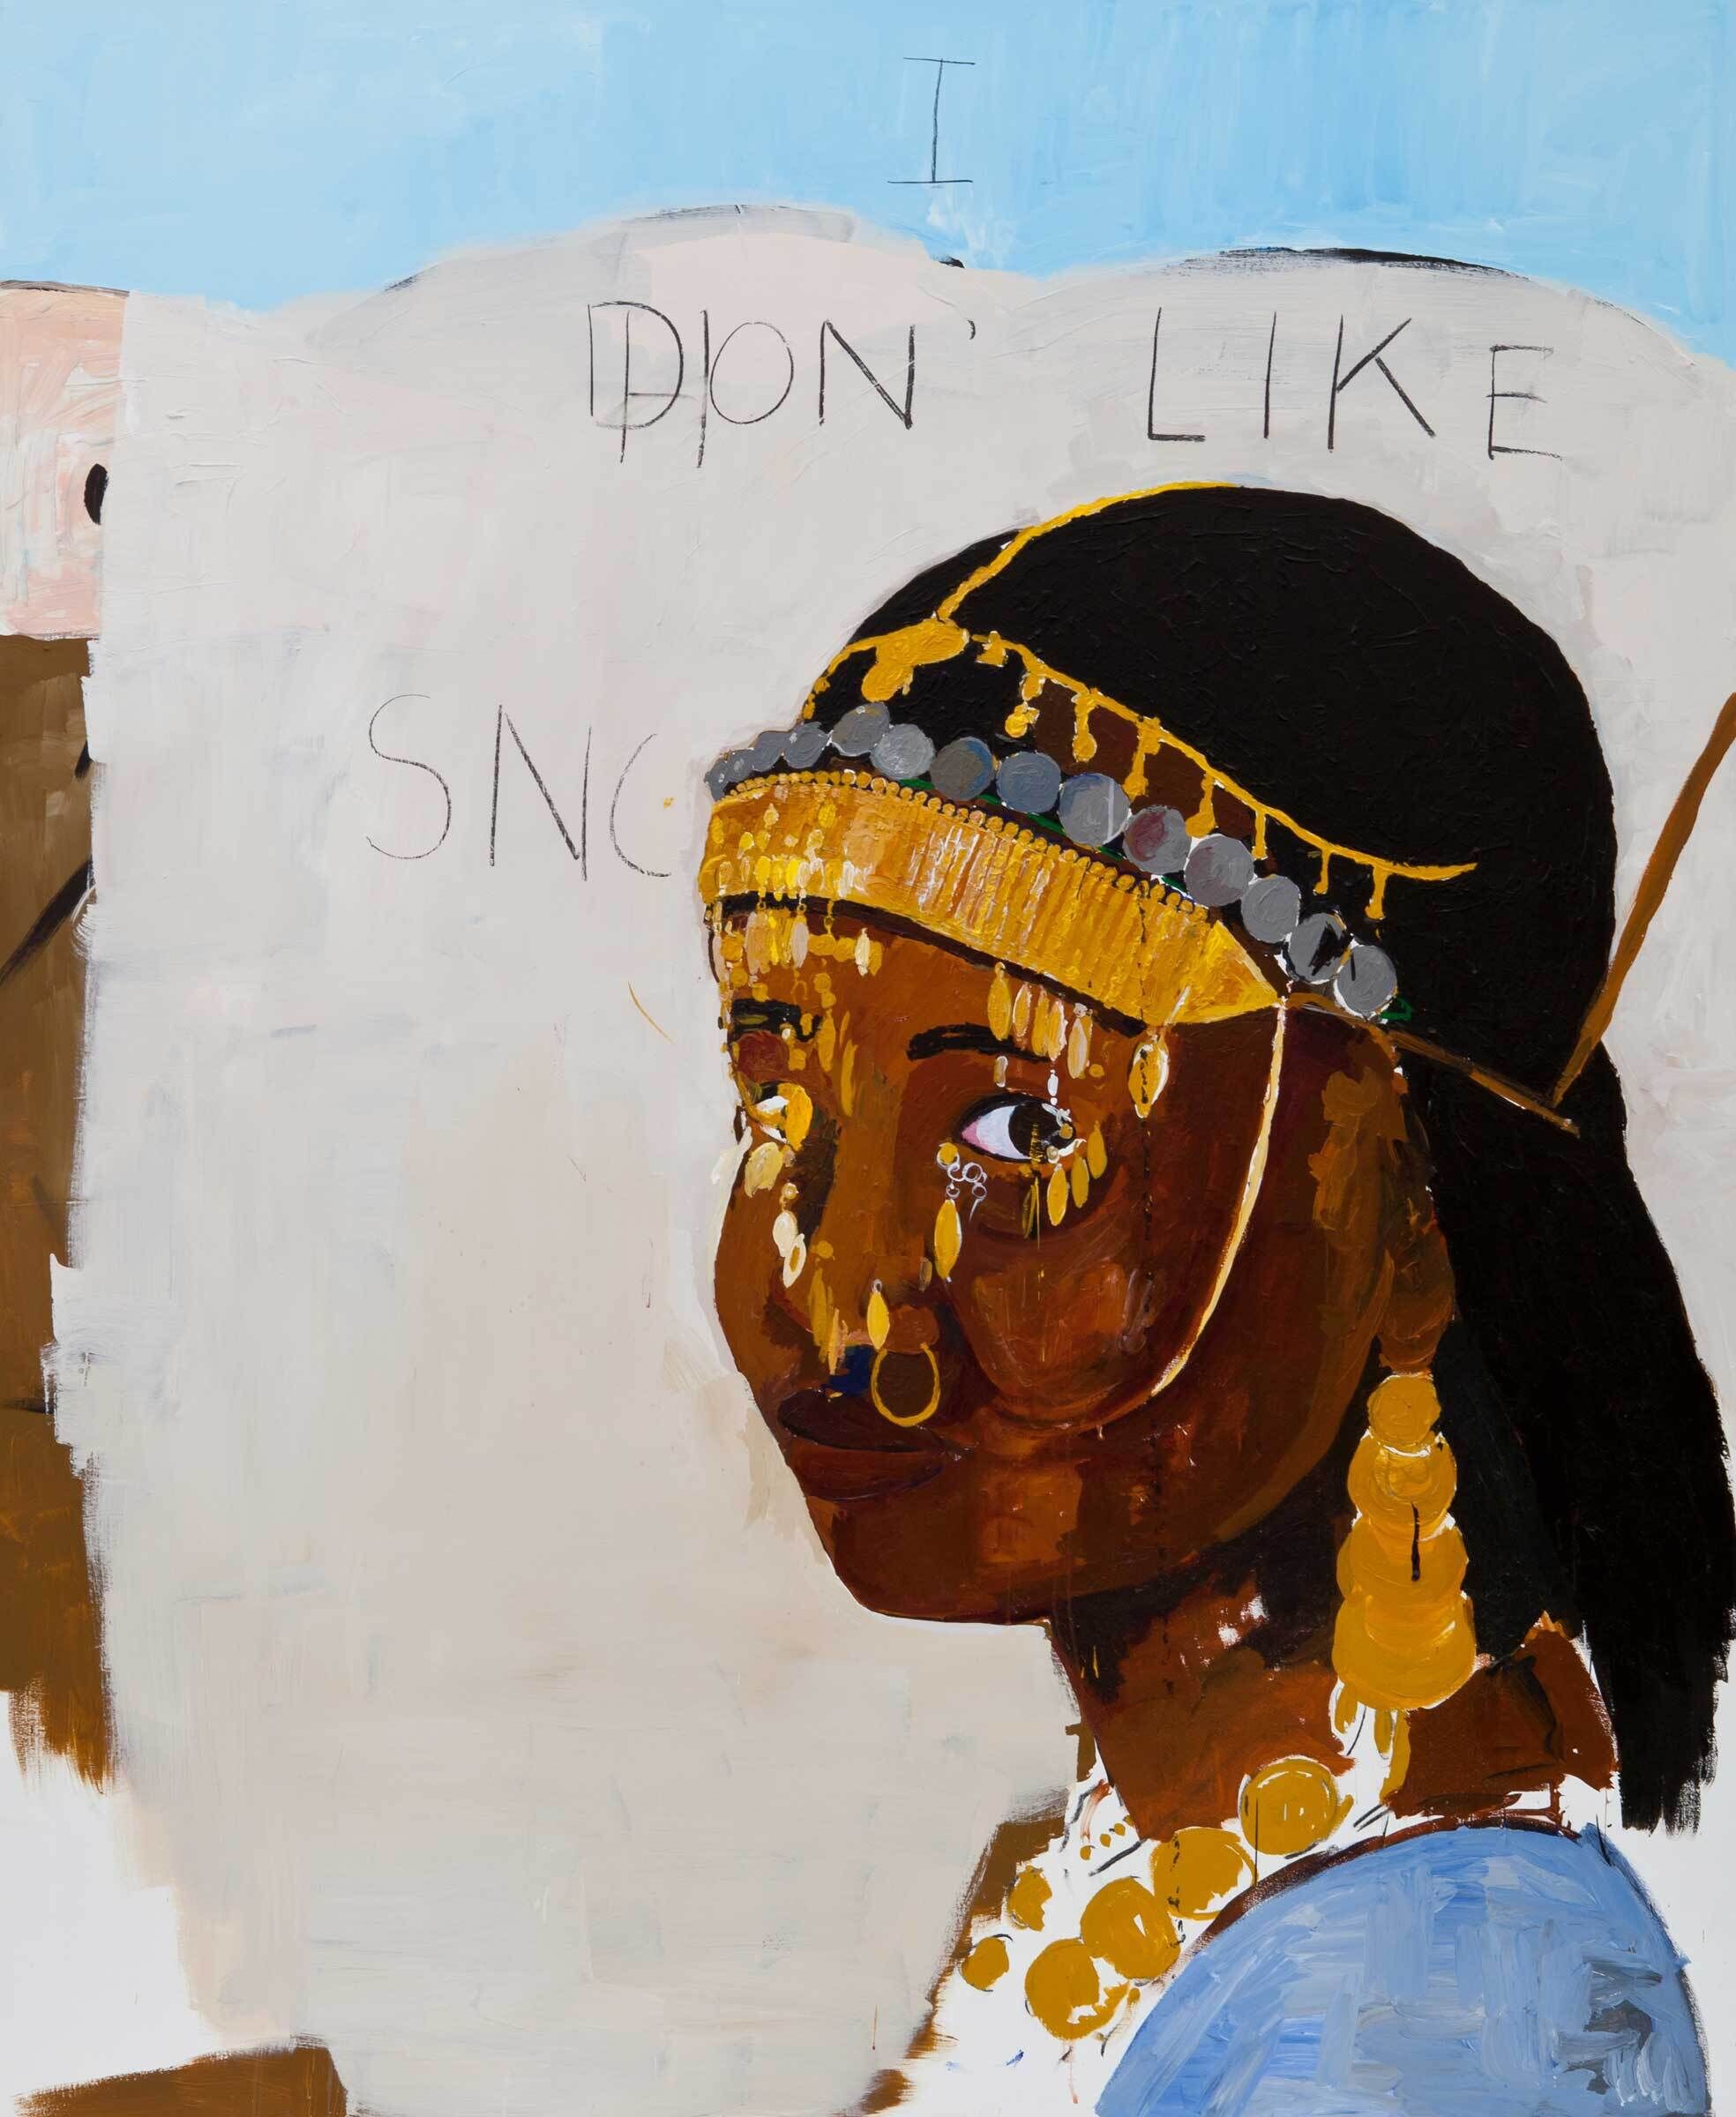 A close-up portrait of a Black woman adorned in gold and silver jewelry. The background is light grey, with a strip of pale blue on the top of the painting. The words "I DON' LIKE SNO" are written in thin black letters, and the last word appears to be cut off my the woman's head.